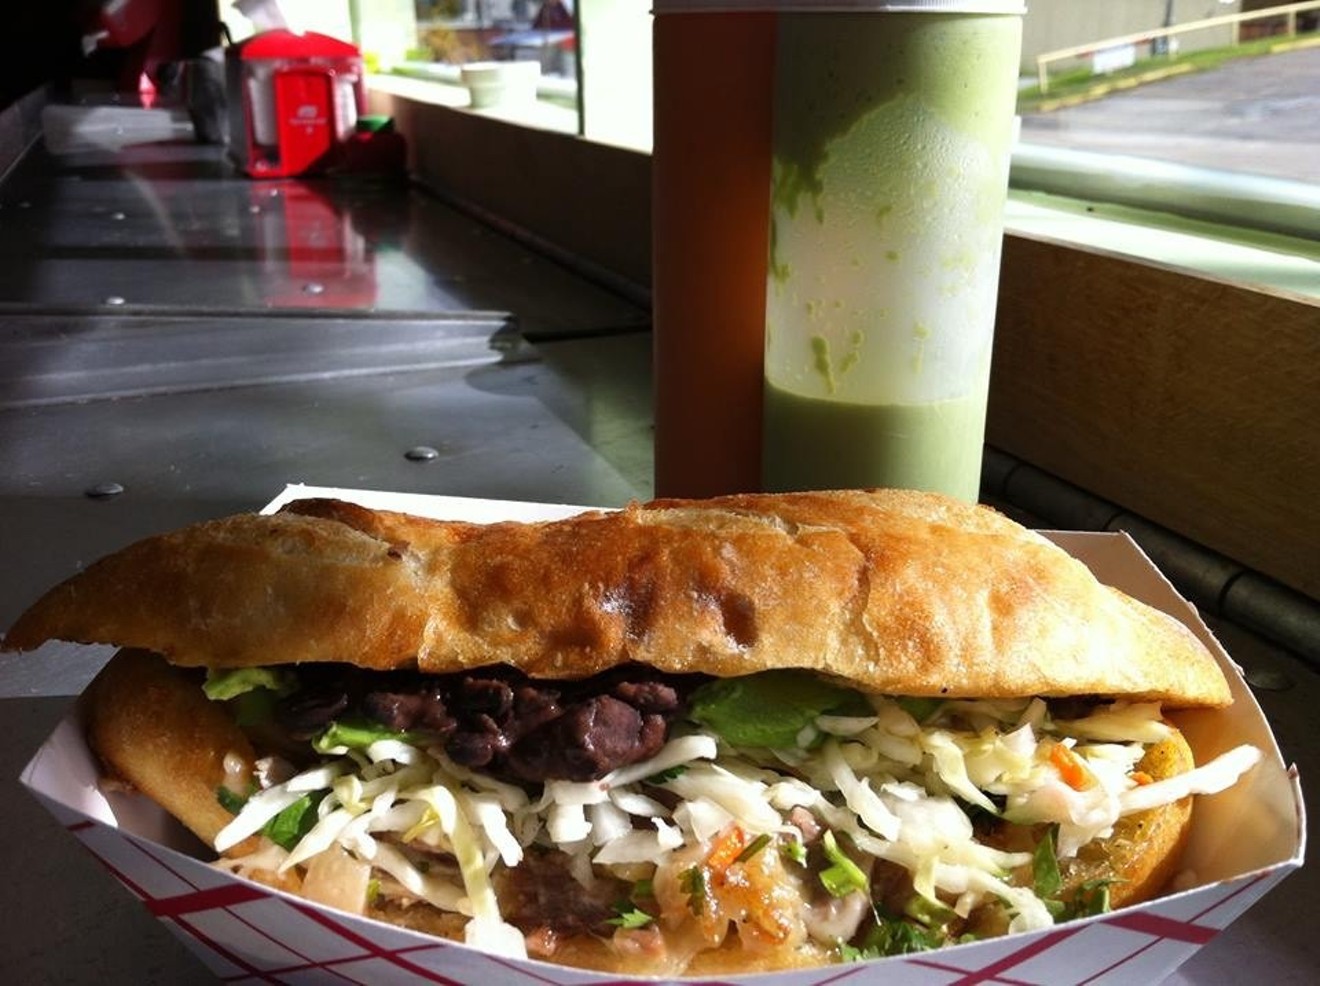 Torta fever is about to hit downtown Dallas.